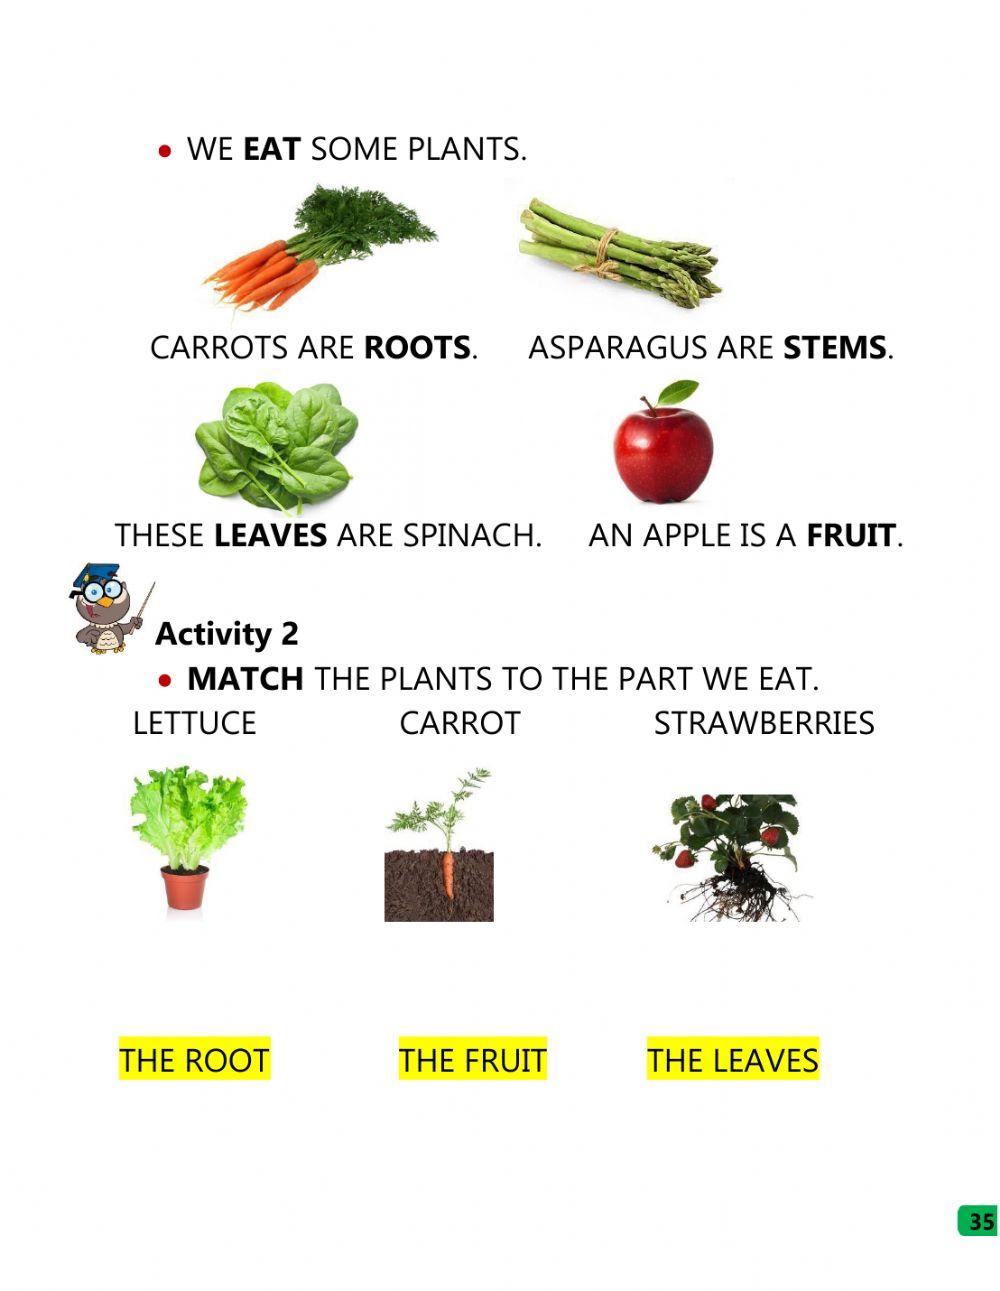 The Parts of plants